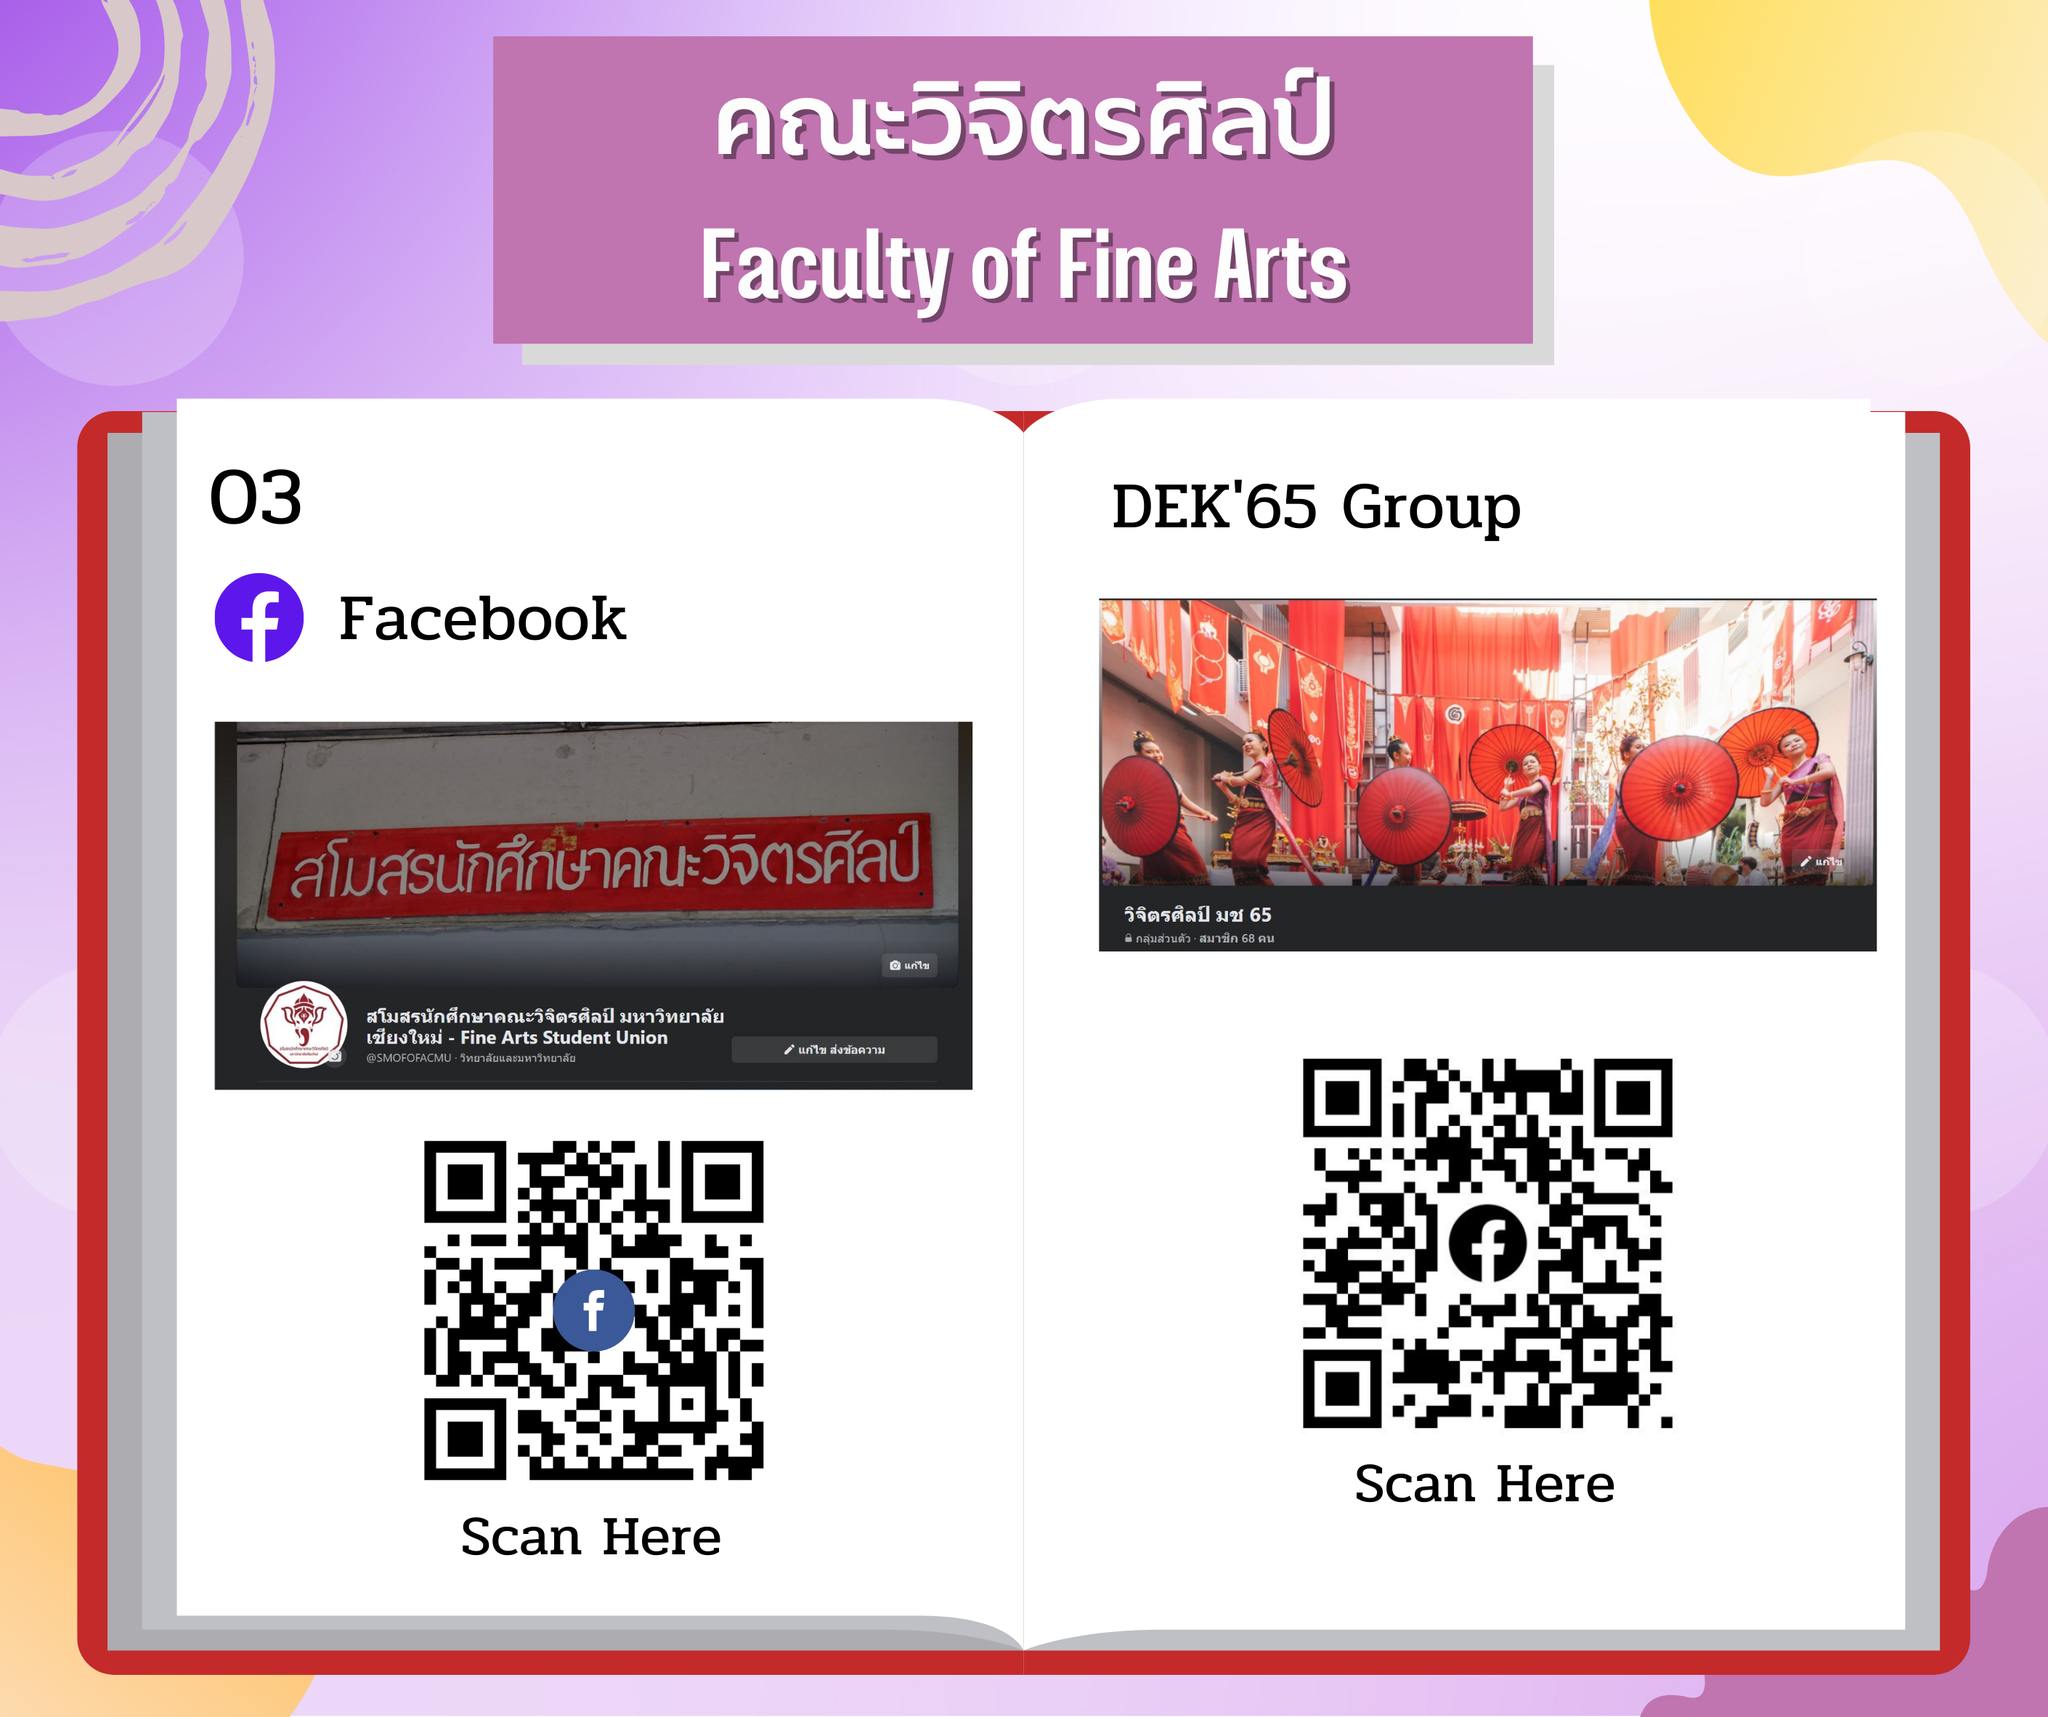 Student Union of Faculty of Find Arts